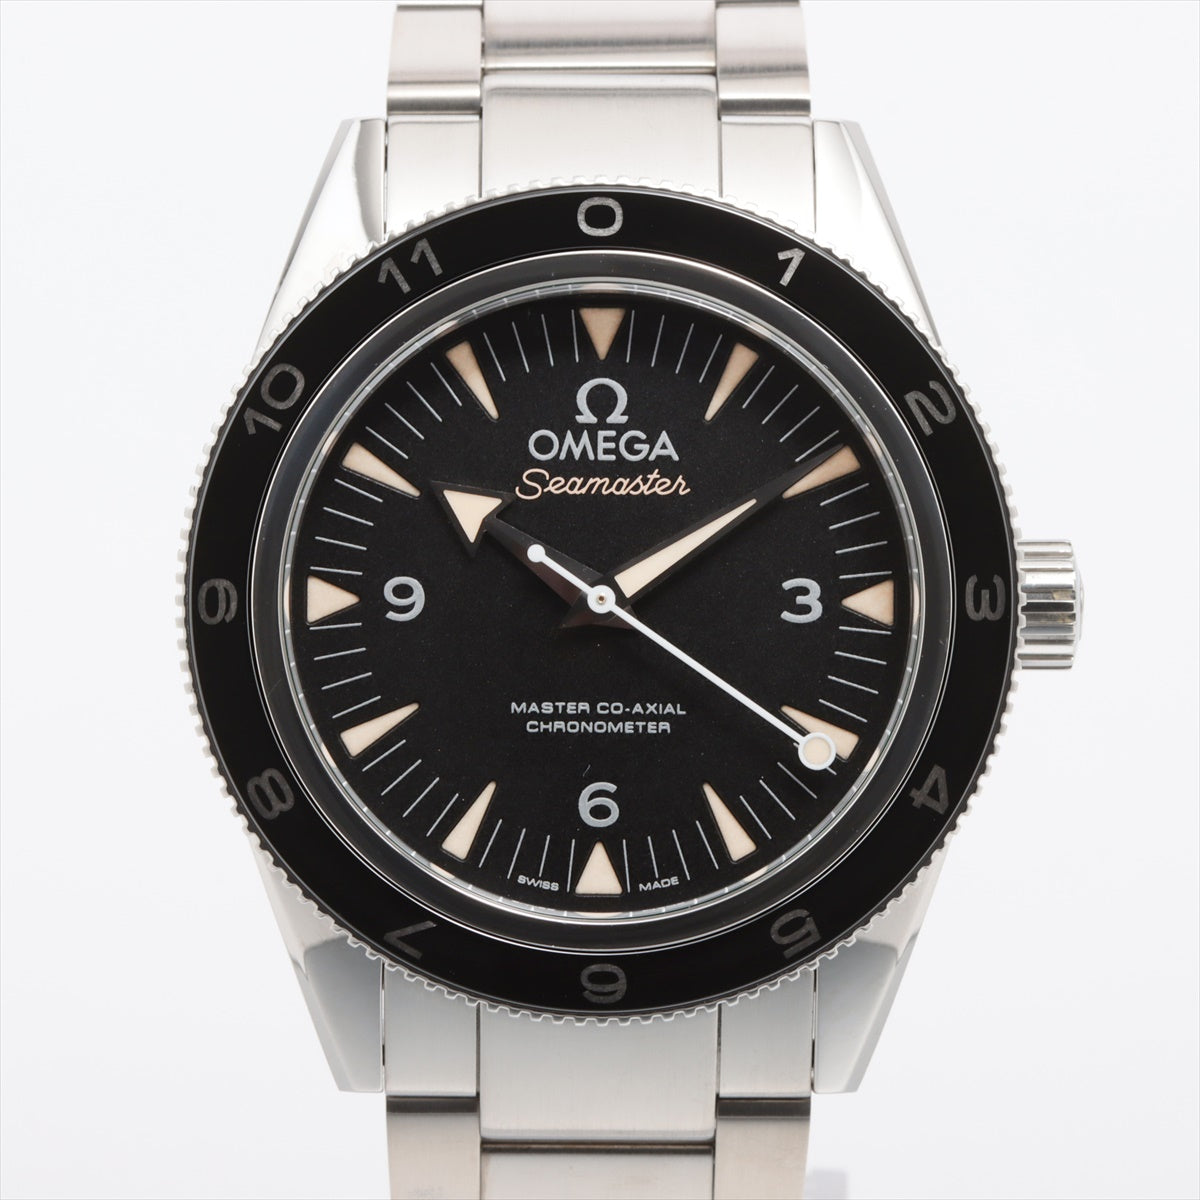 Omega Seamaster 300 Spectre Limited Edition 233.32.41.21.01.001 SS & nylon AT Black-Face